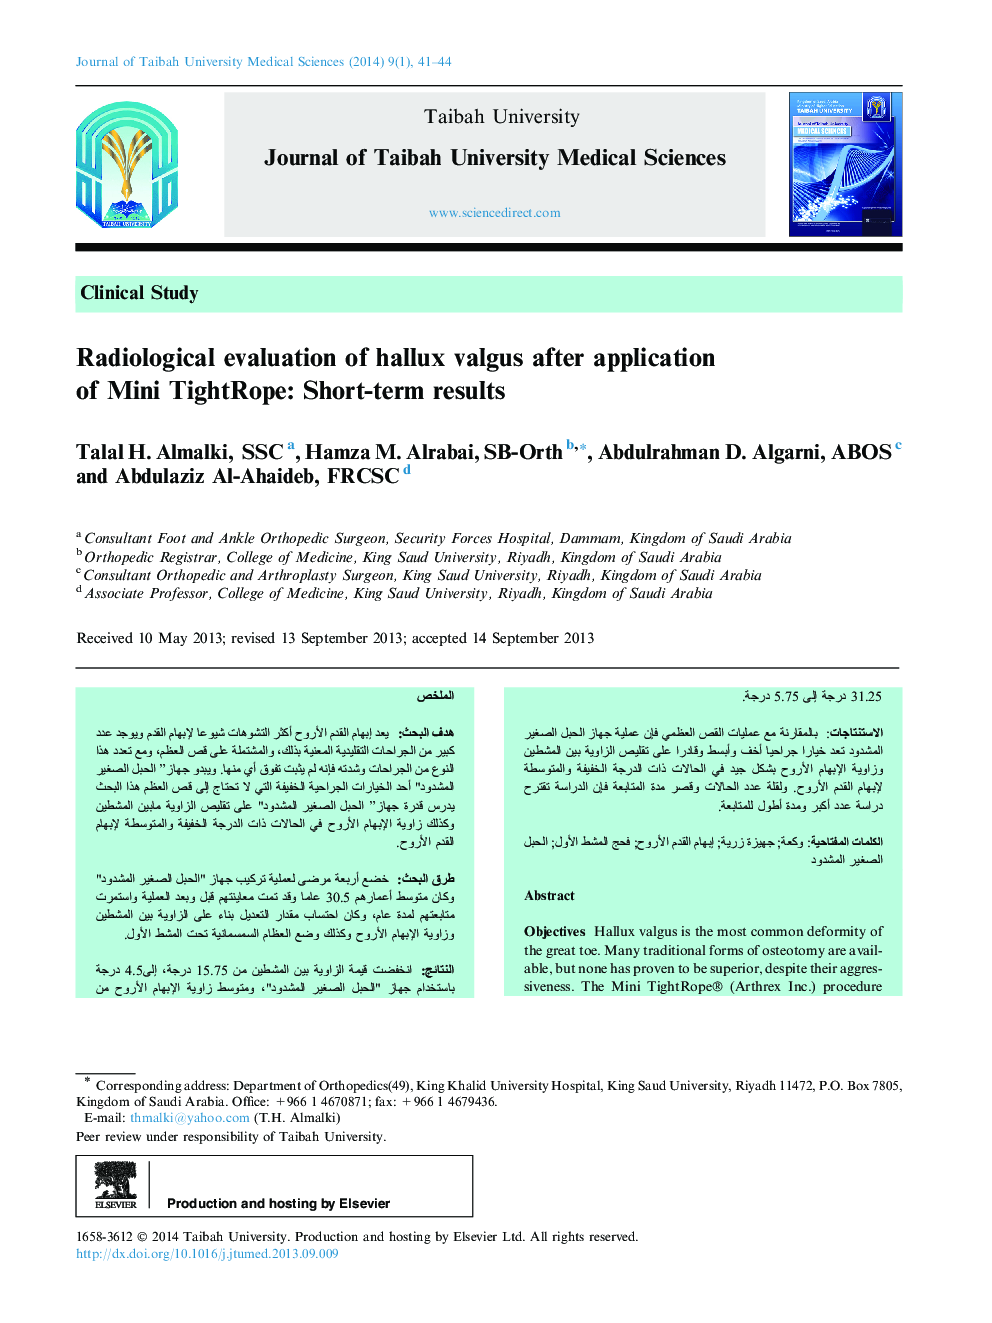 Radiological evaluation of hallux valgus after application of Mini TightRope: Short-term results 